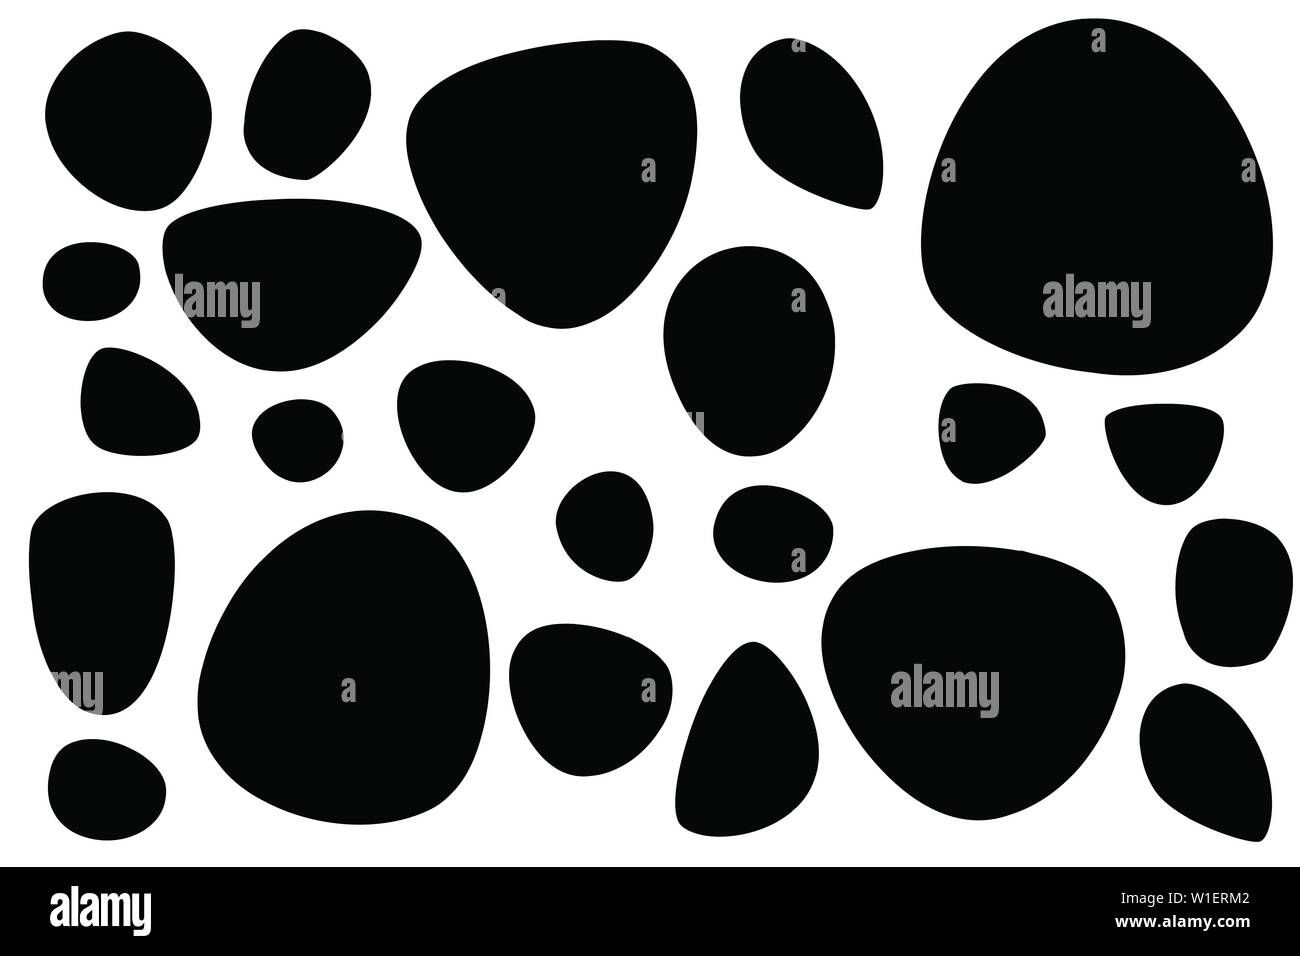 Black silhouette set of smooth stones or pebbles flat vector illustration isolated on white background. Stock Vector